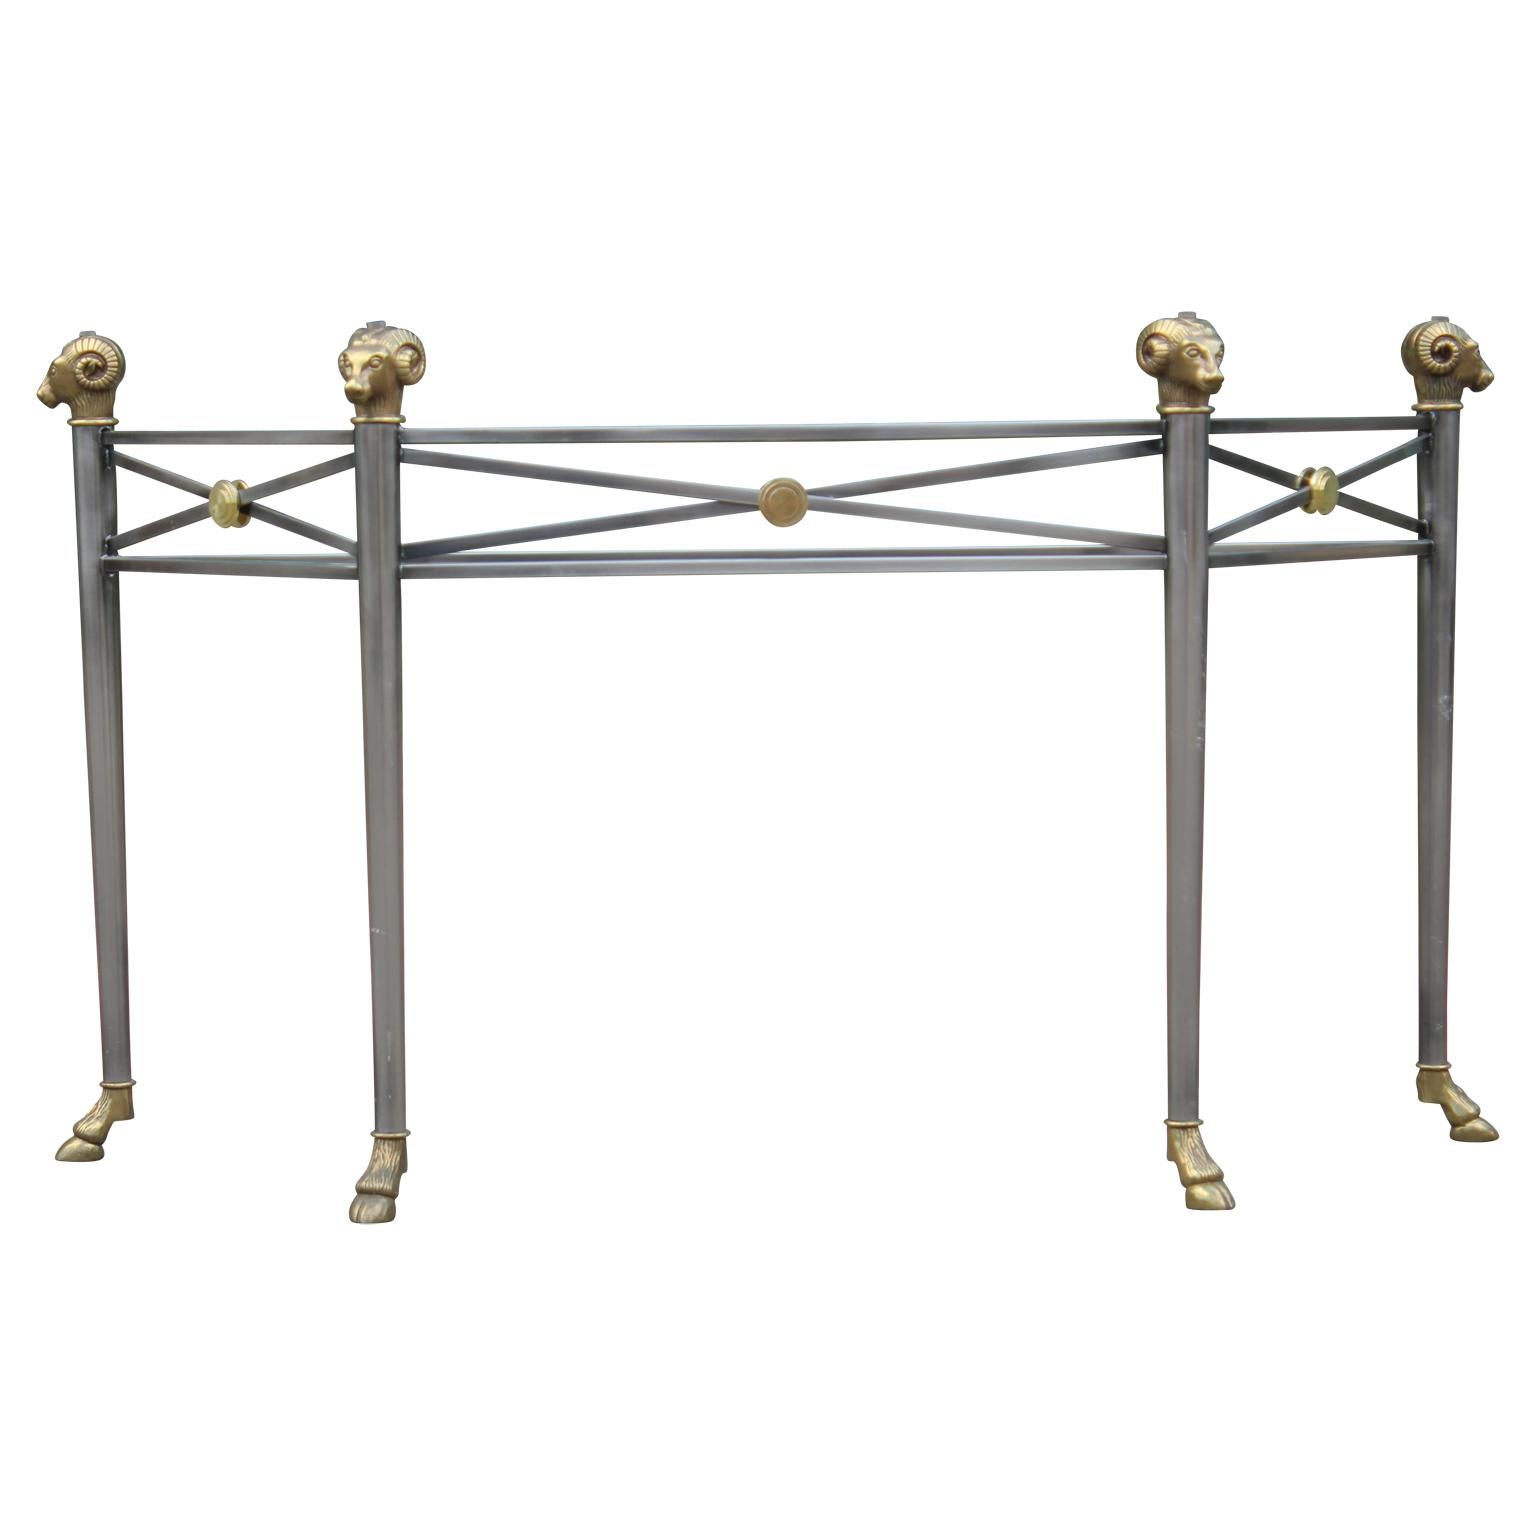 Hollywood Regency brass and brushed nickel ram's head console or sofa table base in the style of Maison Jansen.